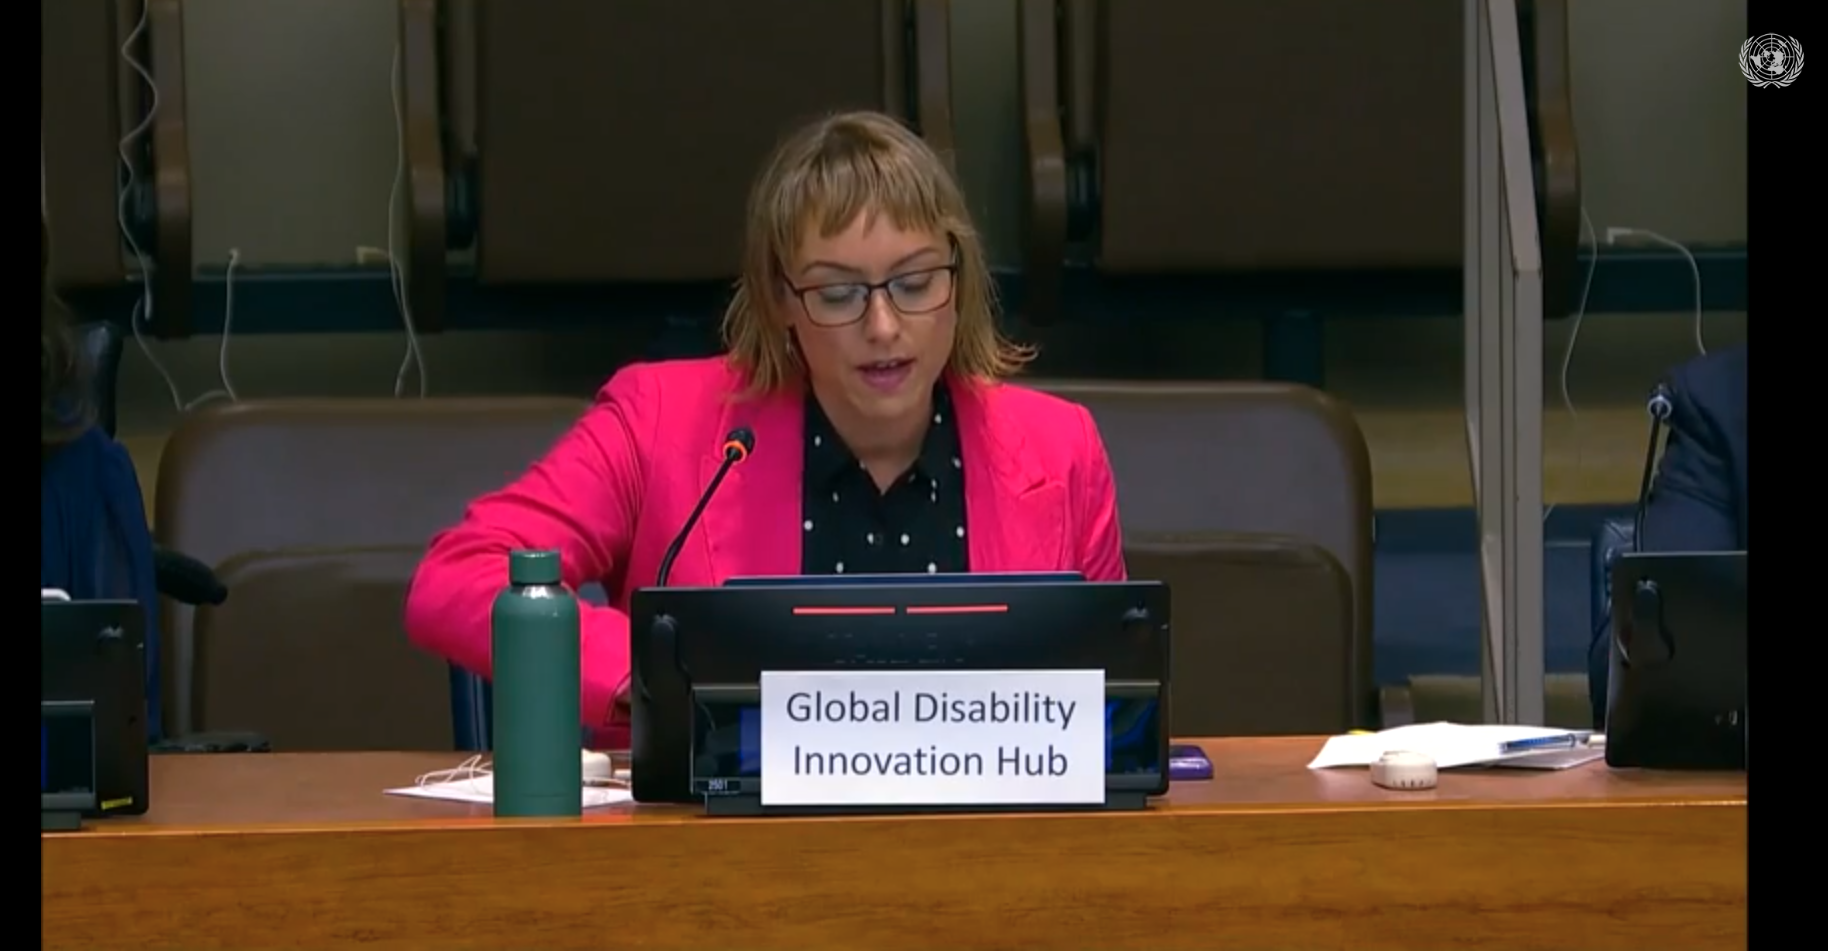 Global Disability Hub's CEO presenting at COSP Cover Image